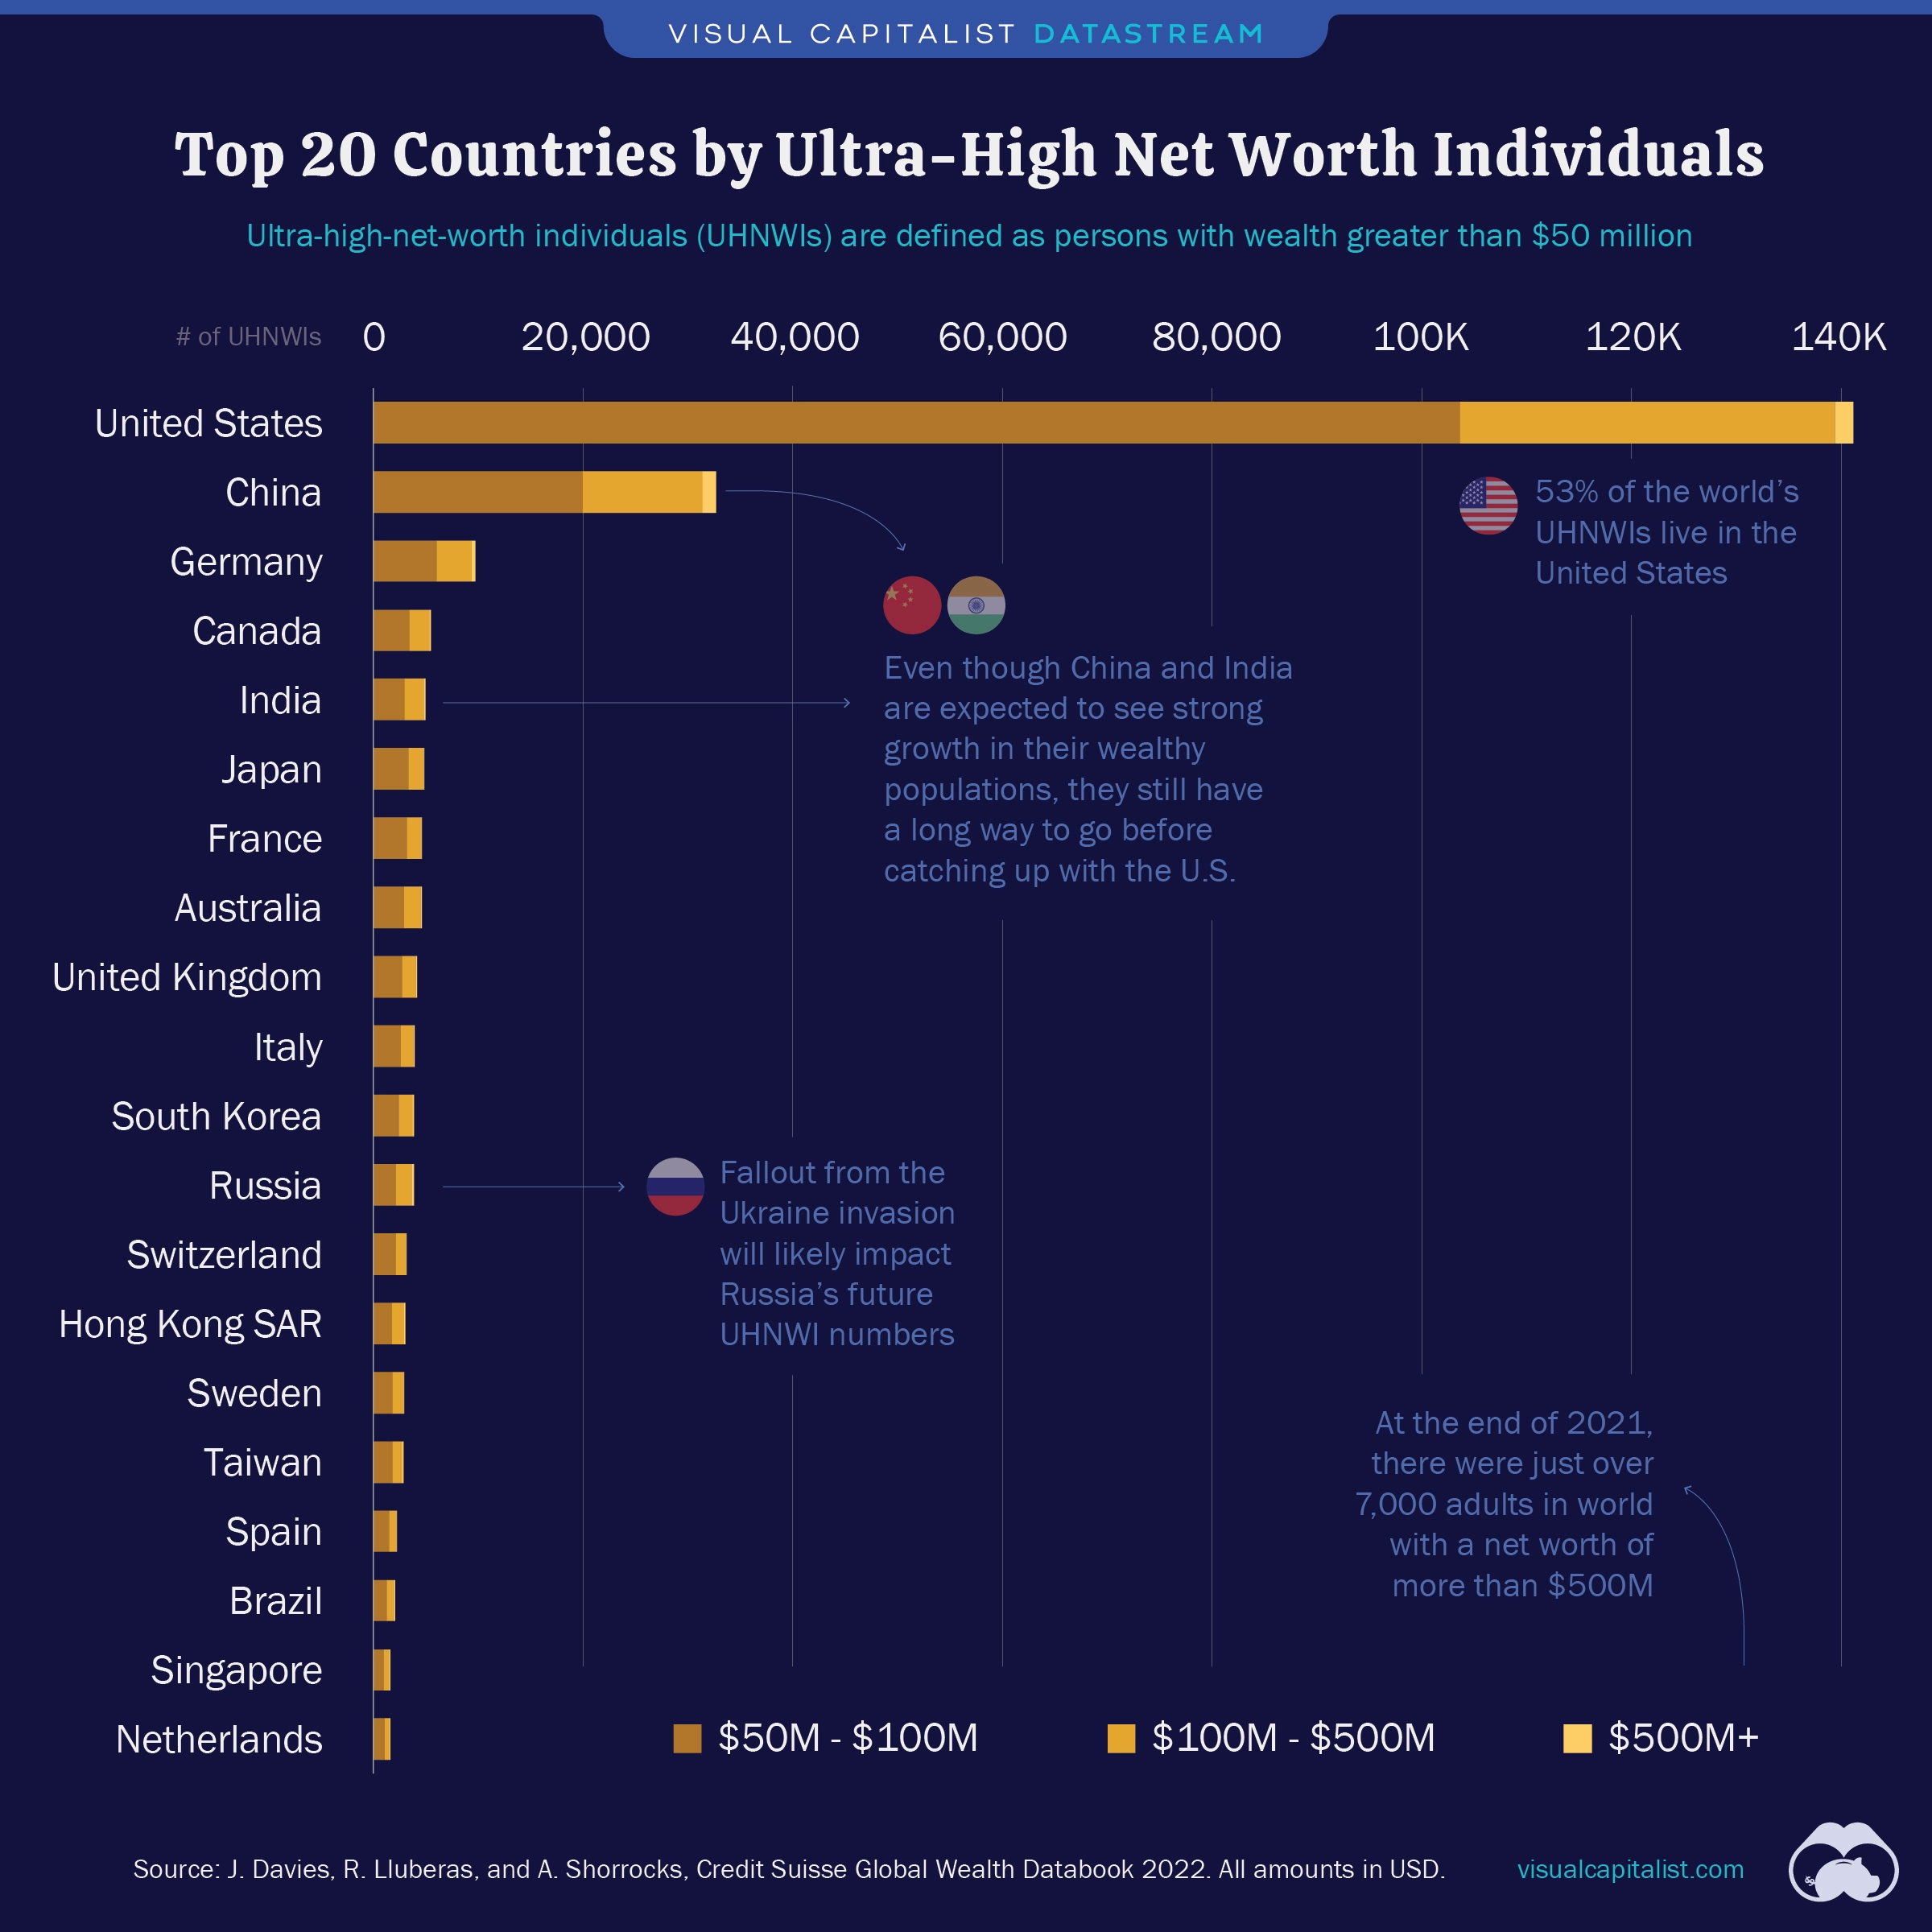 Top 20 Countries With The Most Ultra-Wealthy Individuals: https://www.valuewalk.com/wp-content/uploads/2022/09/Ultra-Wealthy-Individuals.webp